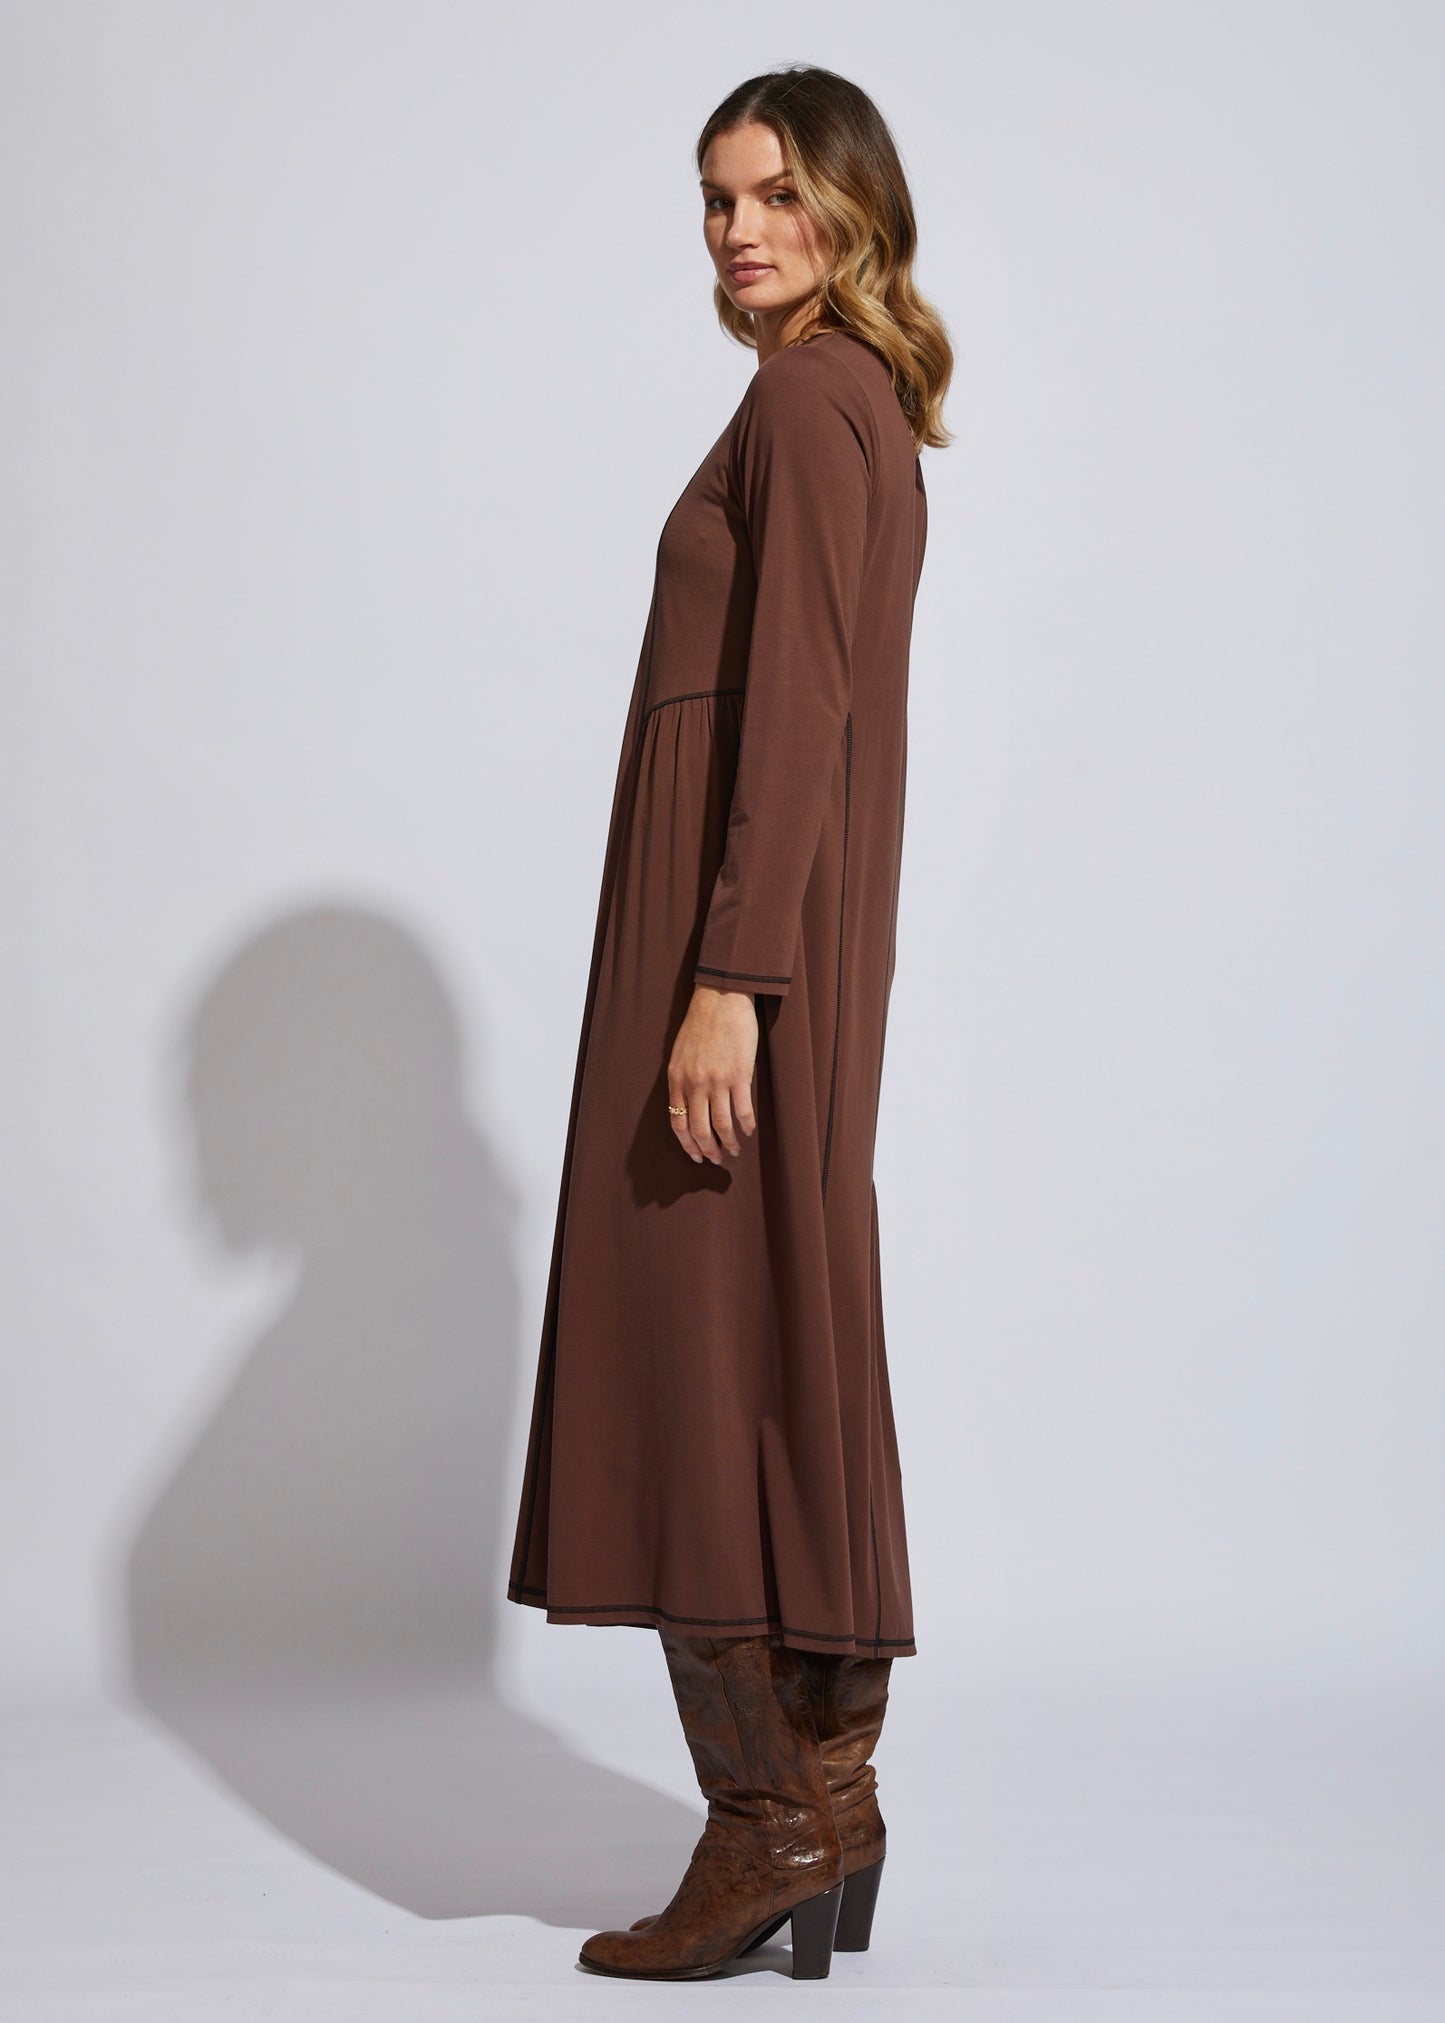 LD & CO DRESS - NUTSHELL - THE VOGUE STORE